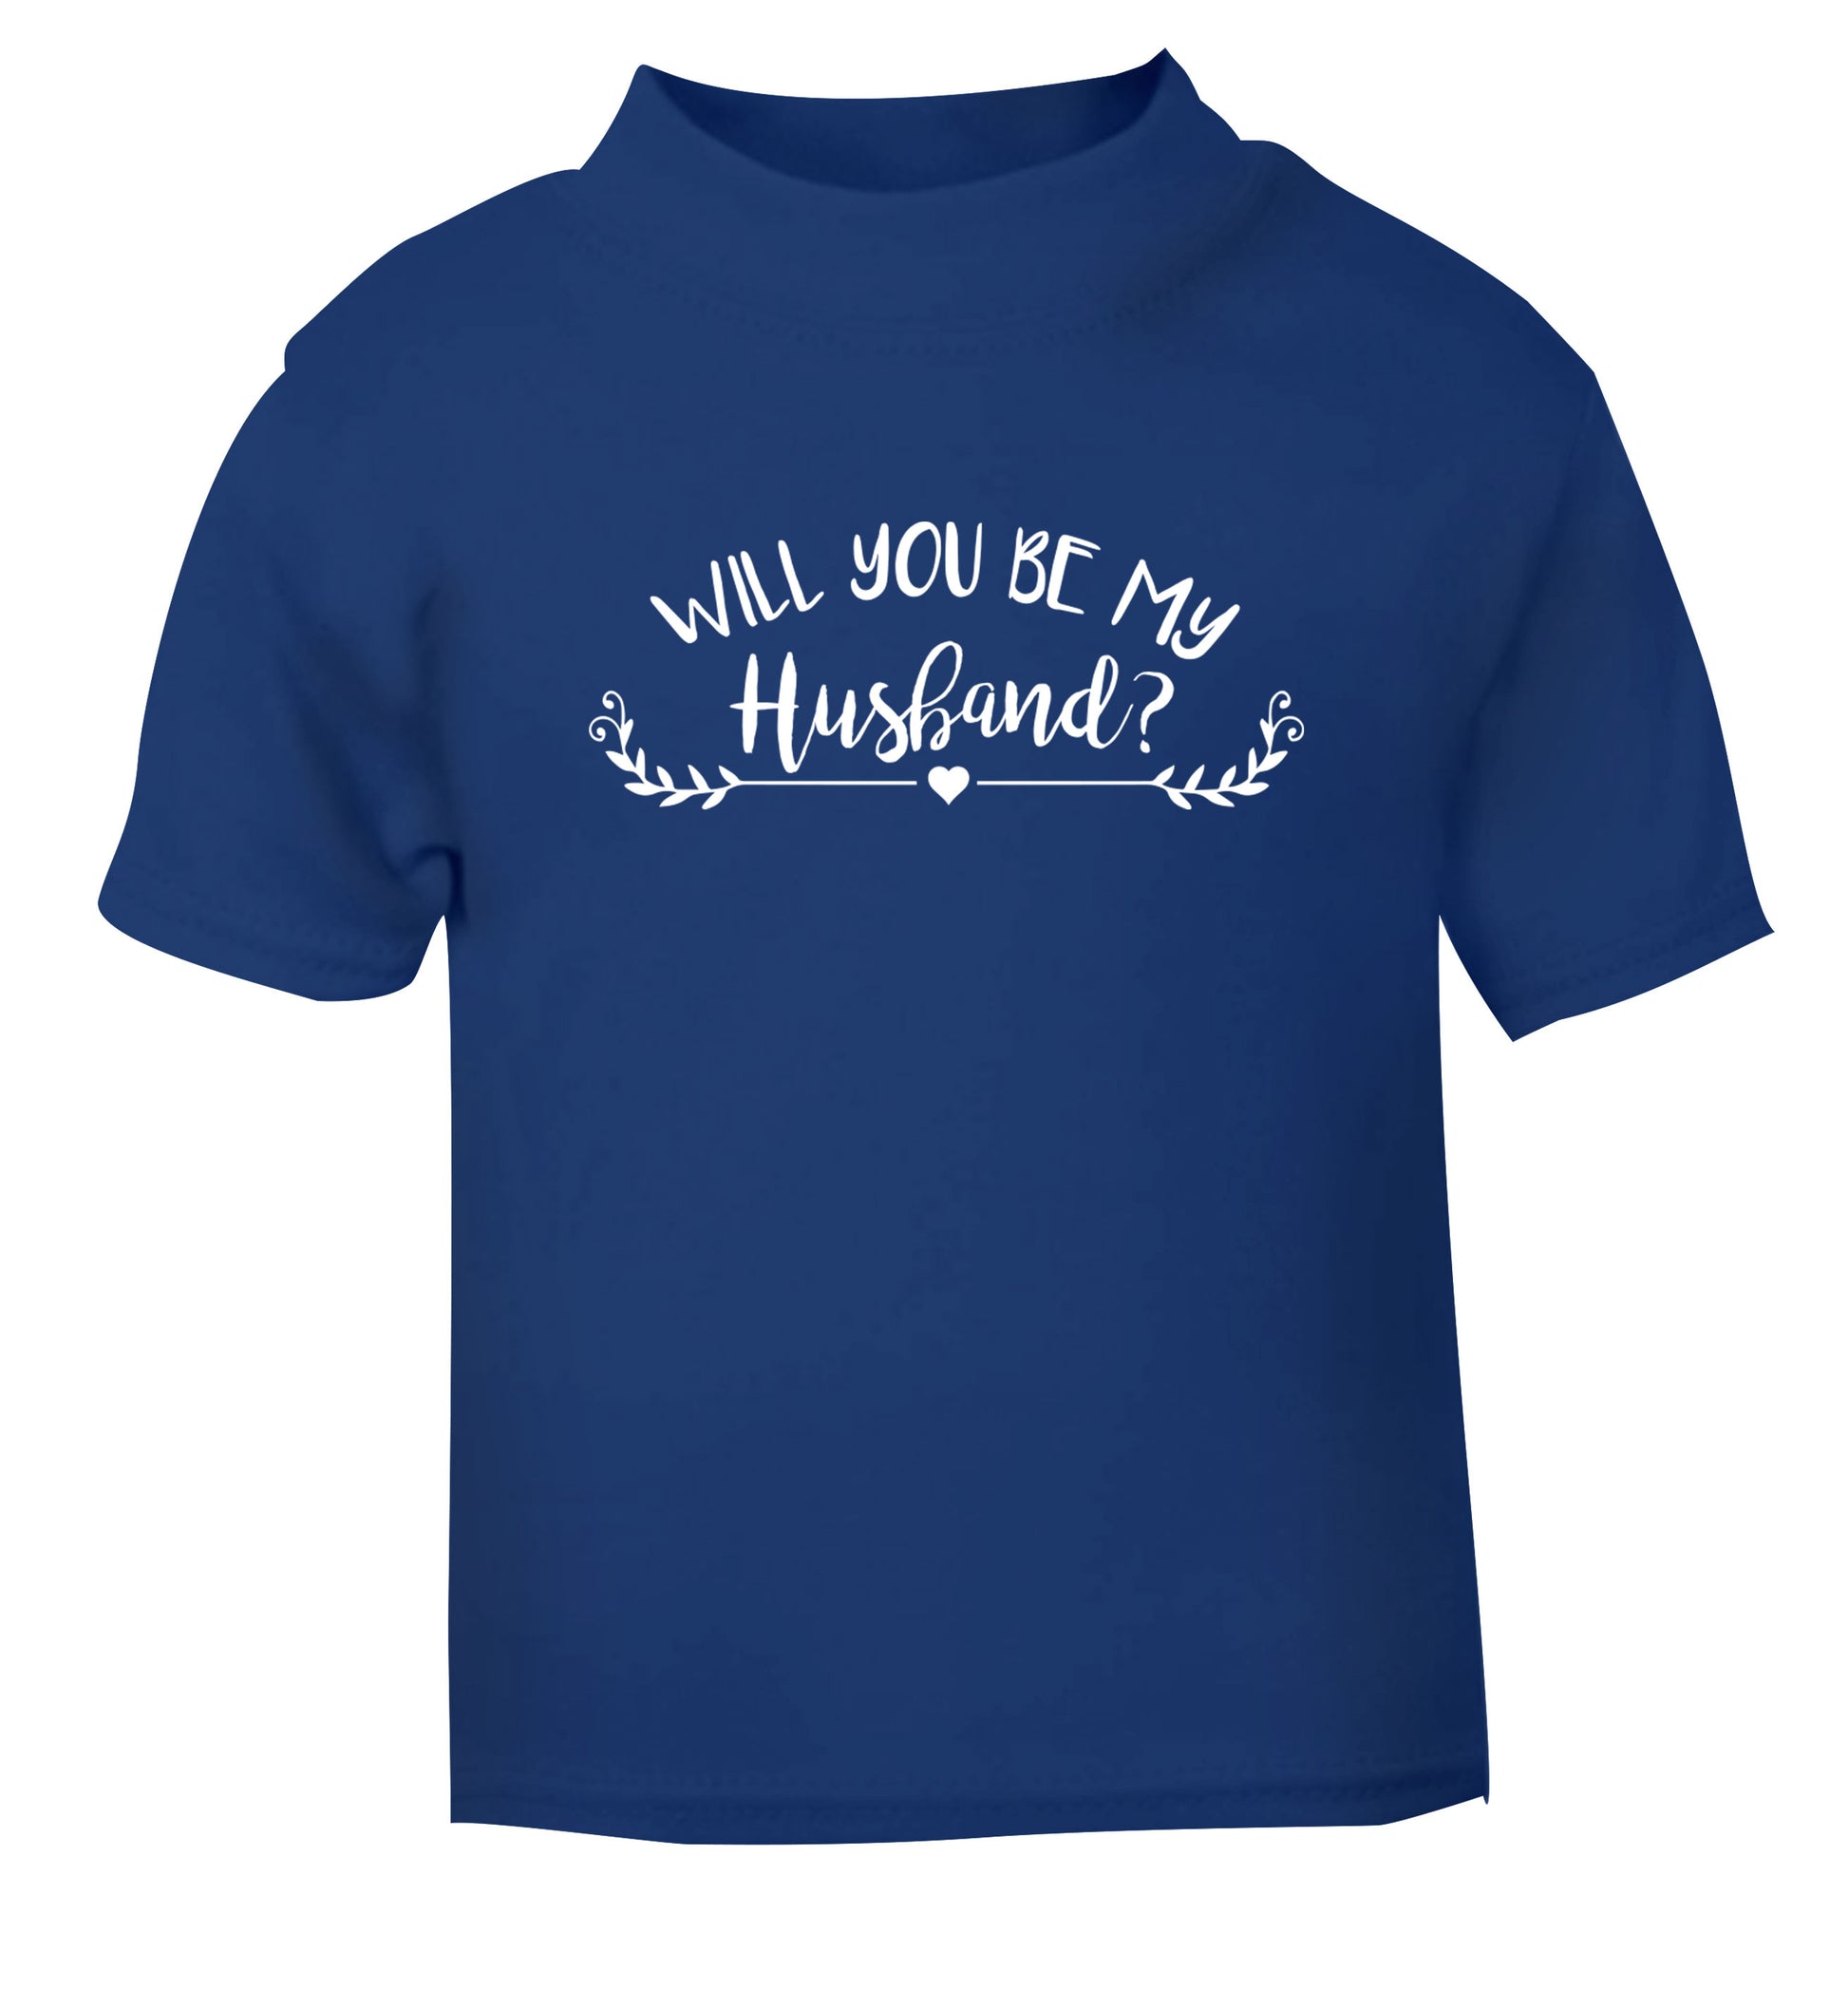 Will you be my husband? blue Baby Toddler Tshirt 2 Years